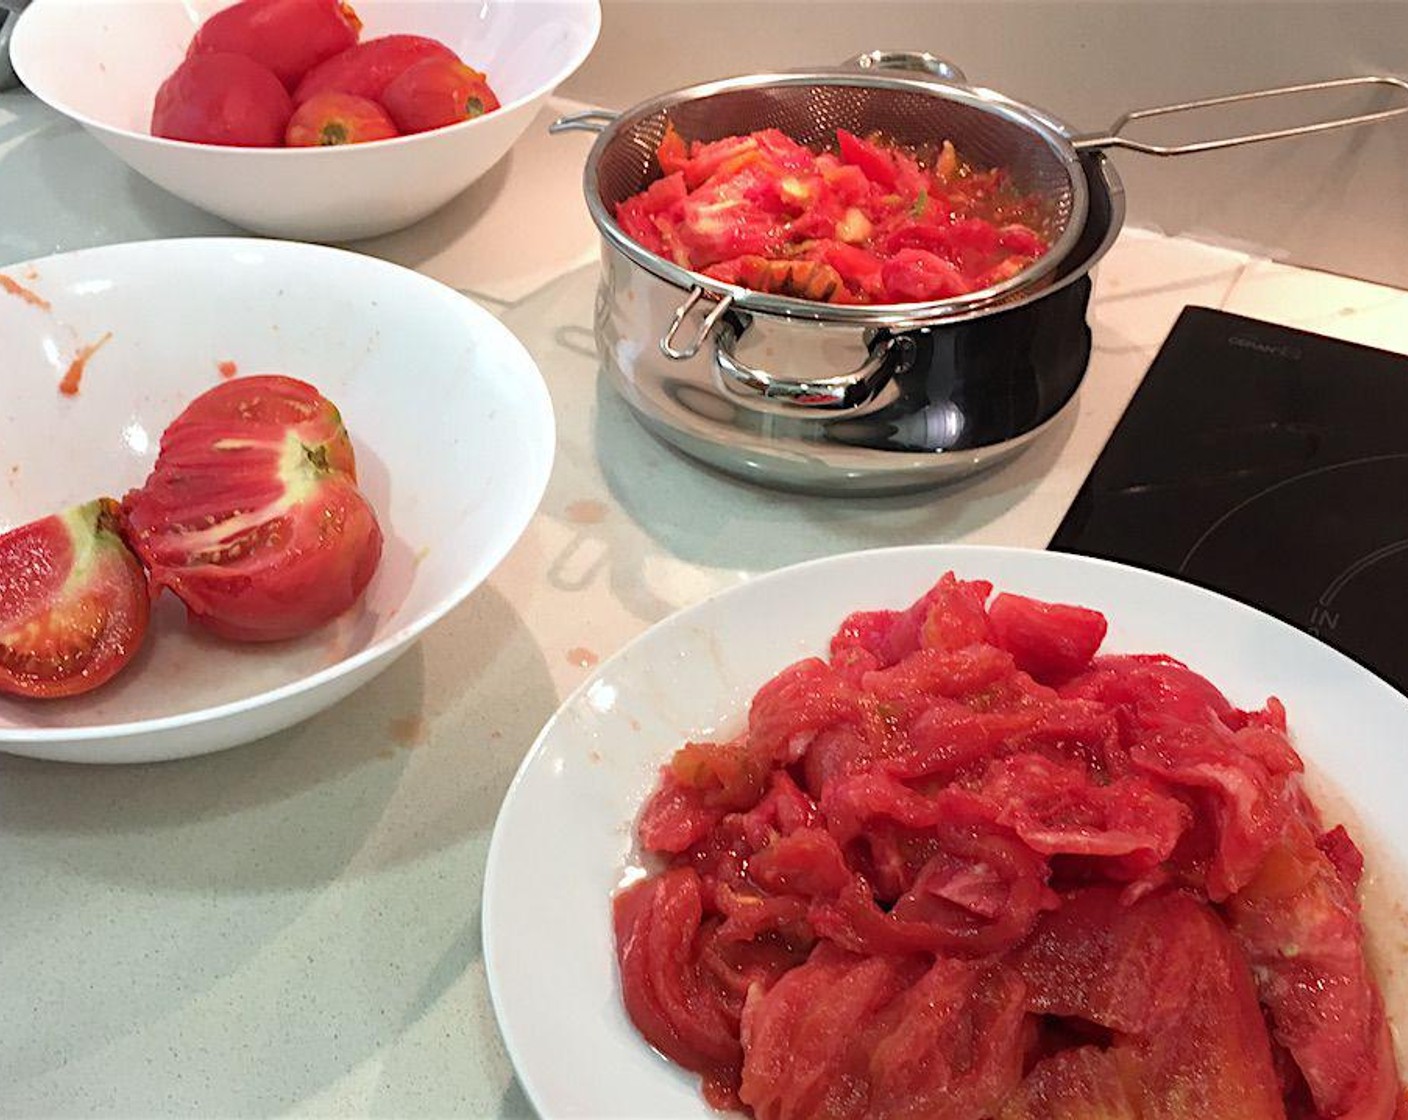 step 3 Blanch Roma Tomatoes (9 cups) in boiling water for 30 to 60 seconds, dunk in cold water and remove skins. Cut tomatoes in half to remove seeds and cores, straining any leftover juices into a bowl.